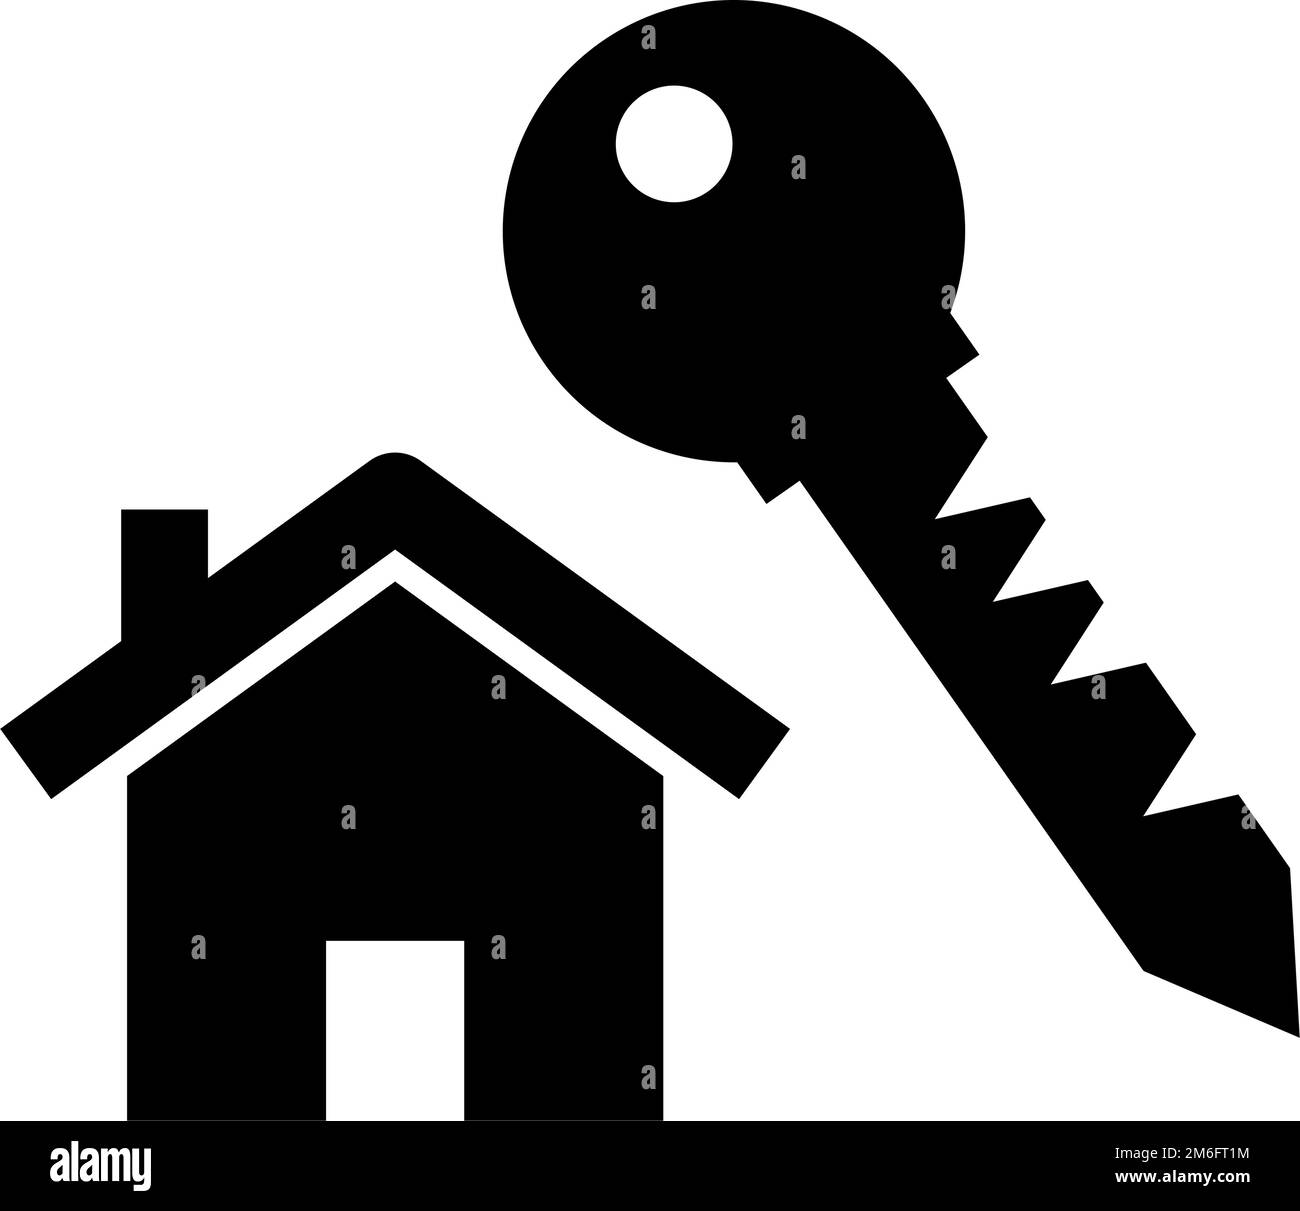 House and key silhouette icon. Home security and locking. Editable vector. Stock Vector